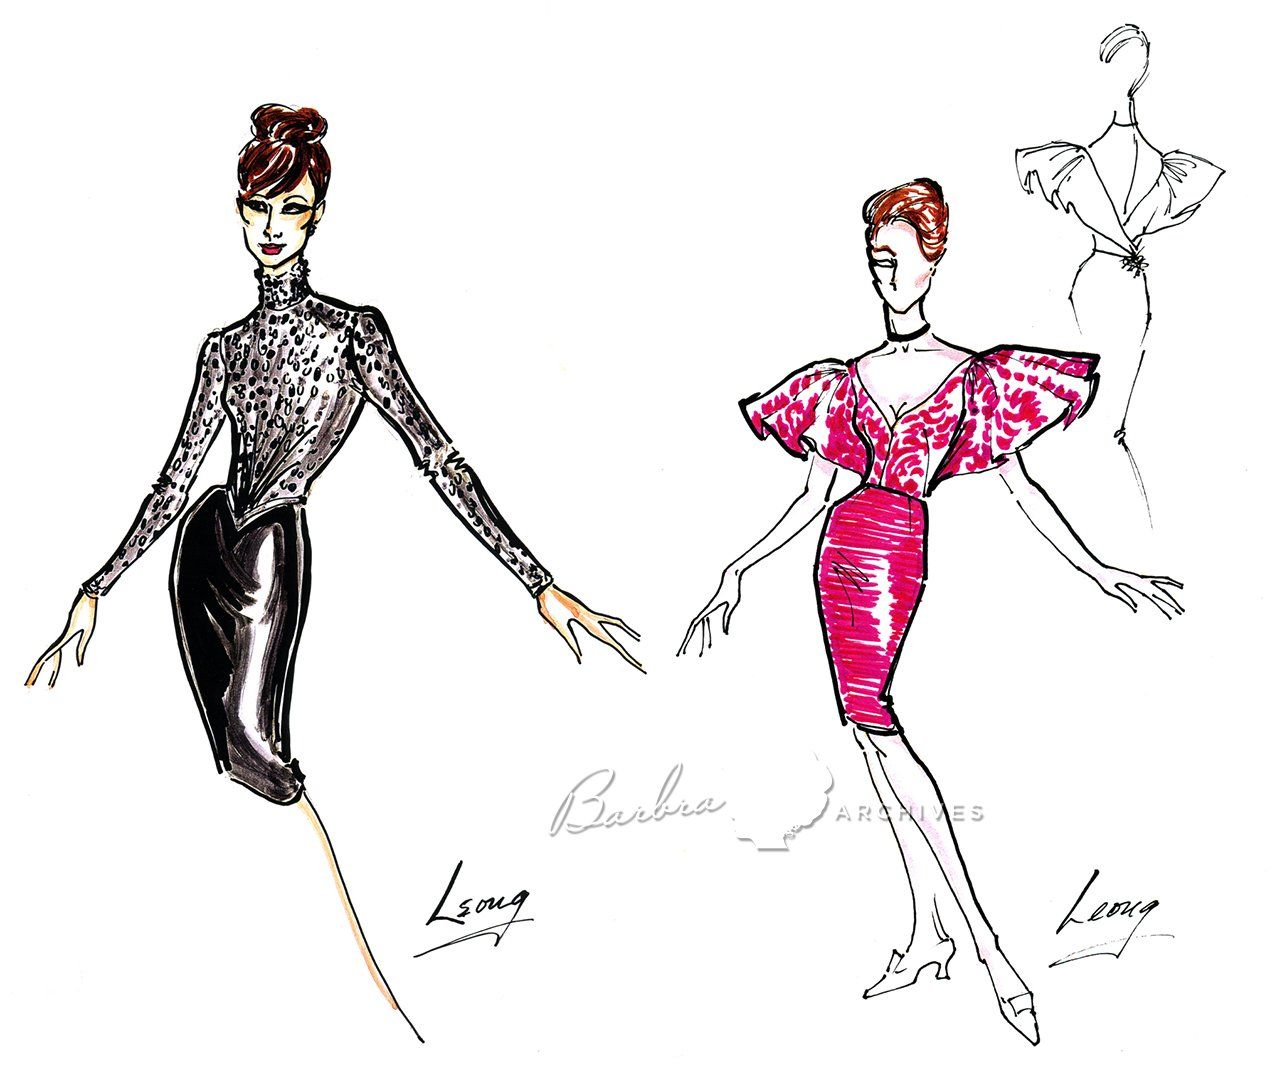 Two illustrations of Streisand's nightclub clothes by Terry Leong